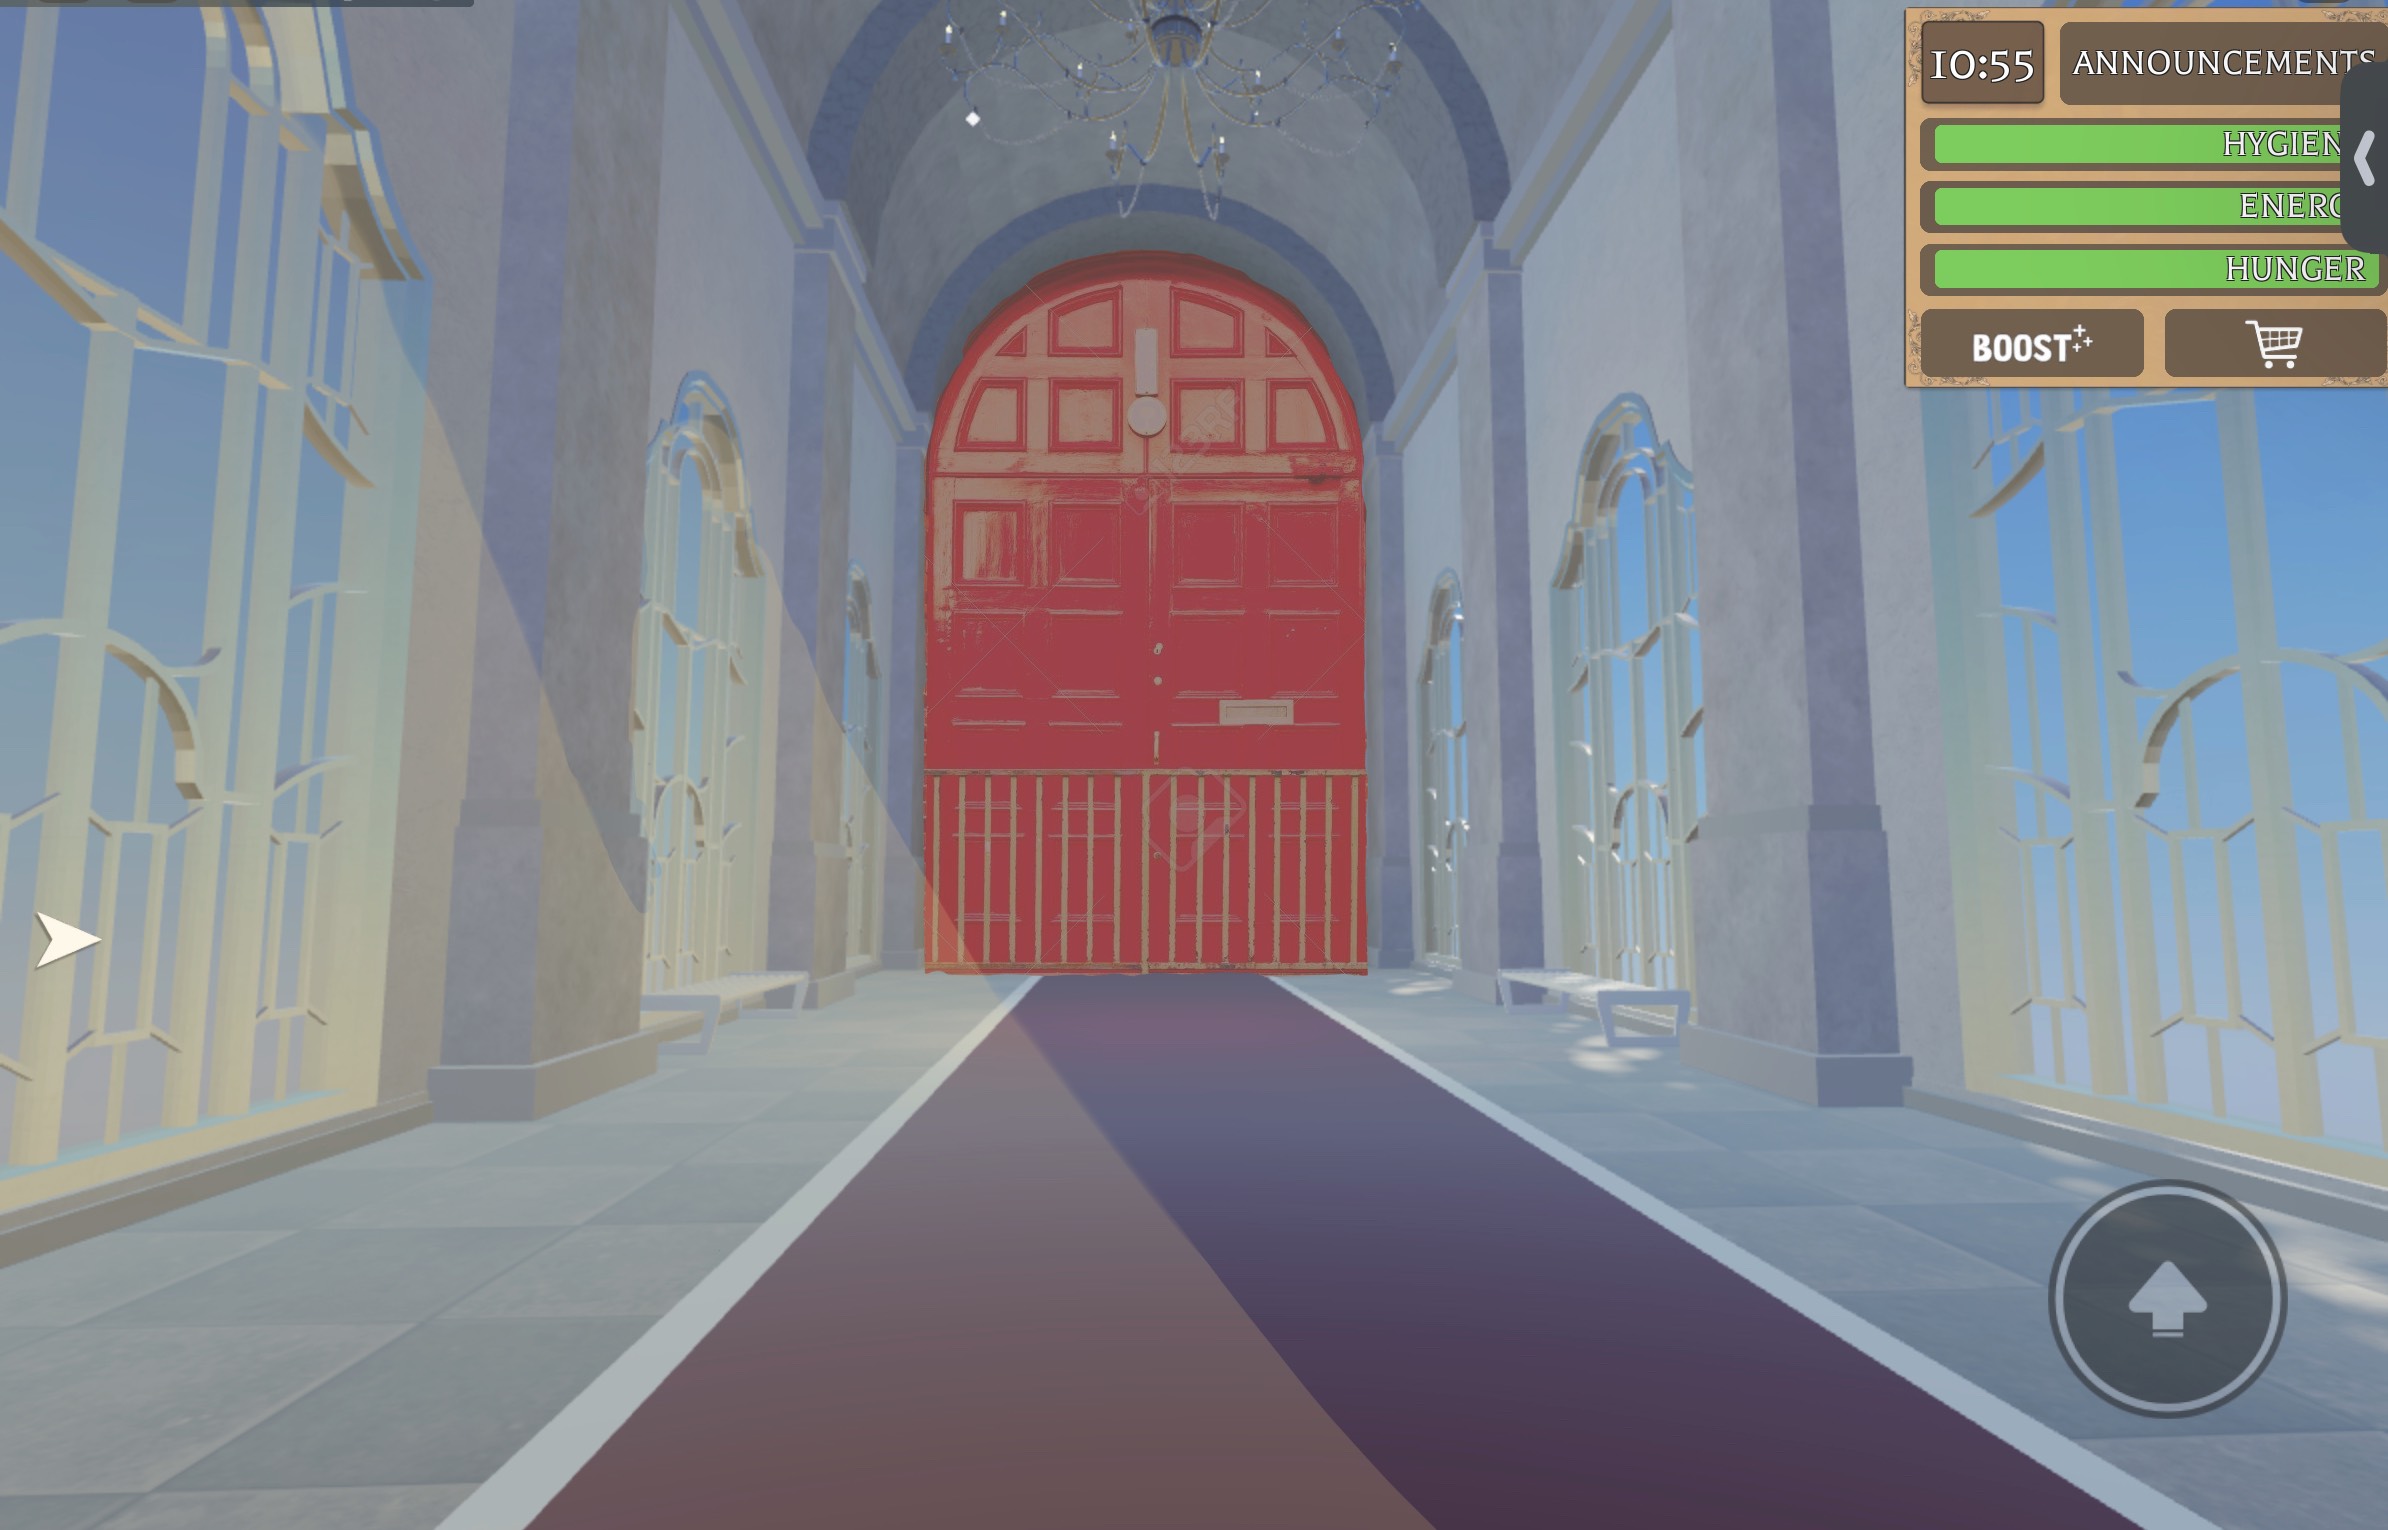 A marble castle hallway with a large arched red double door at the end, and sunshine shining through the windows.